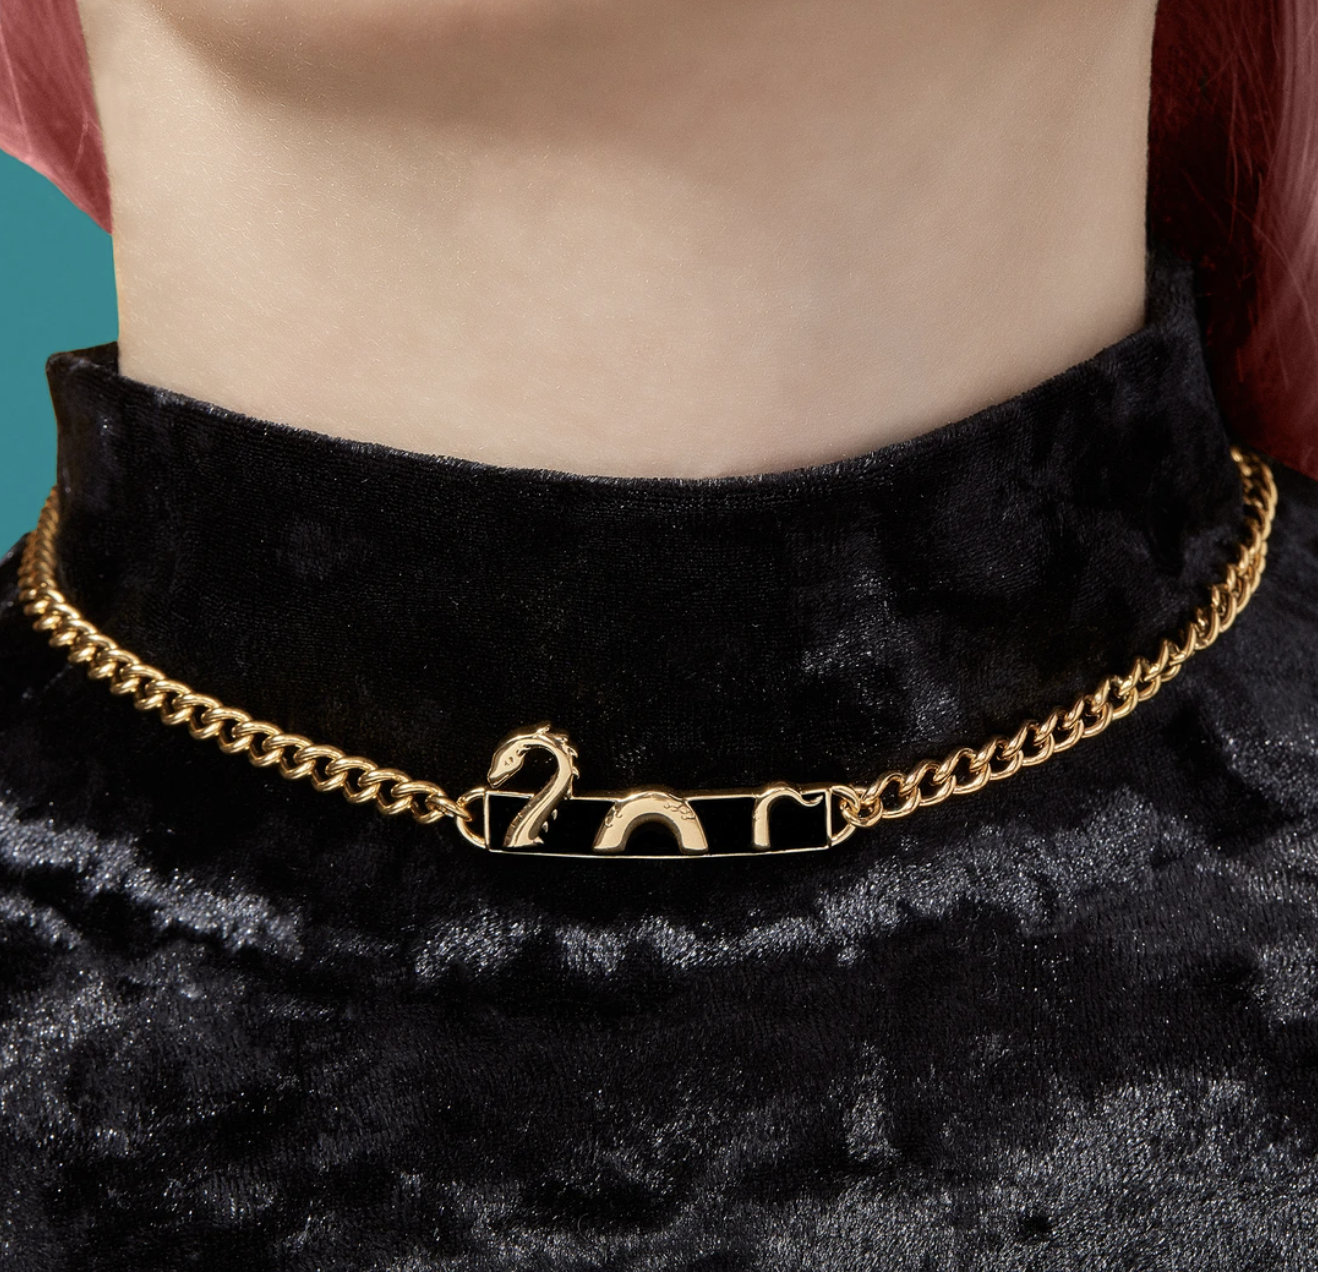 model with turtleneck with a Loch Ness monster choker layered on top of it